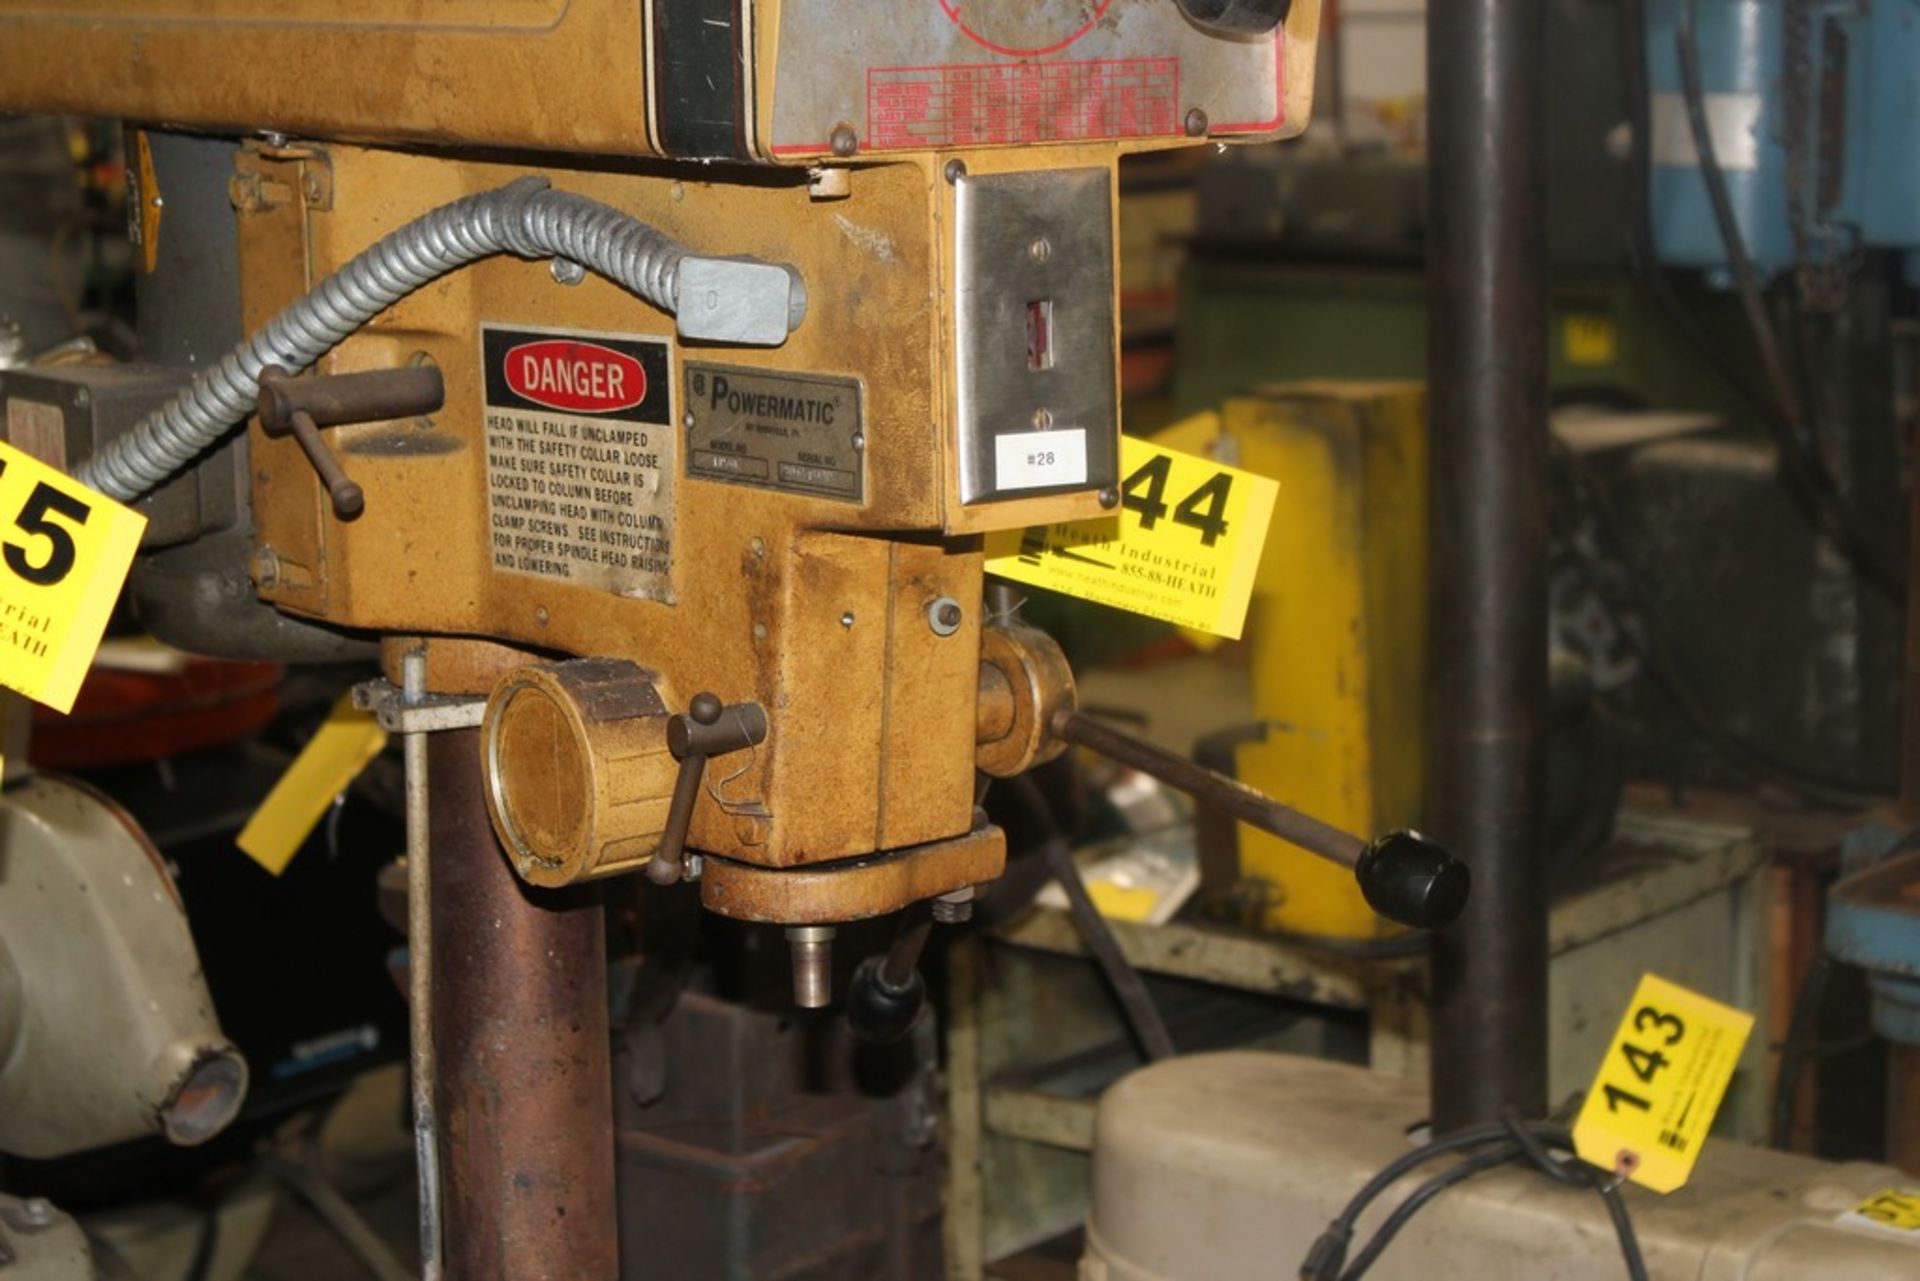 POWERMATIC MODEL 1150A 15" VARIABLE SPEED FLOOR STANDING DRILL PRESS, 475-4800 RPM - Image 3 of 4